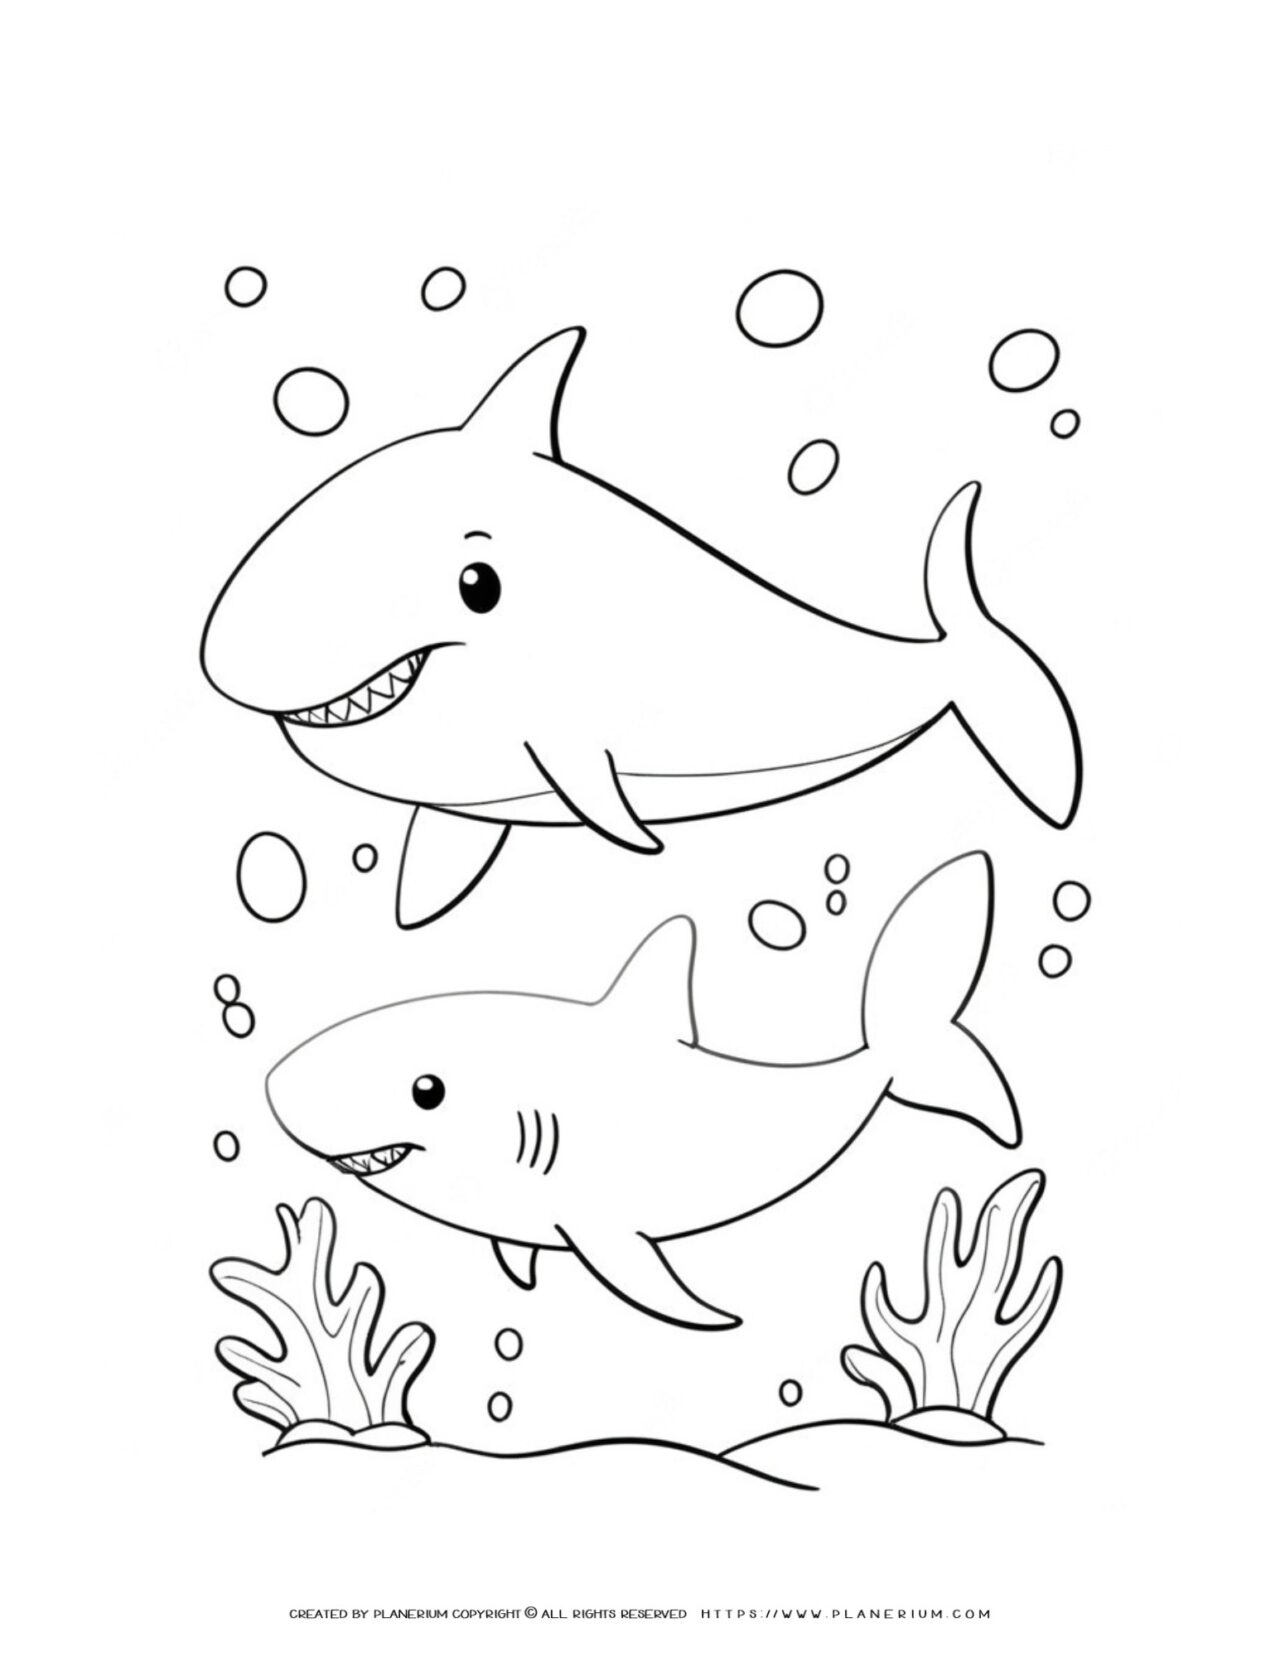 Coloring-page-with-two-cartoon-sharks-underwater